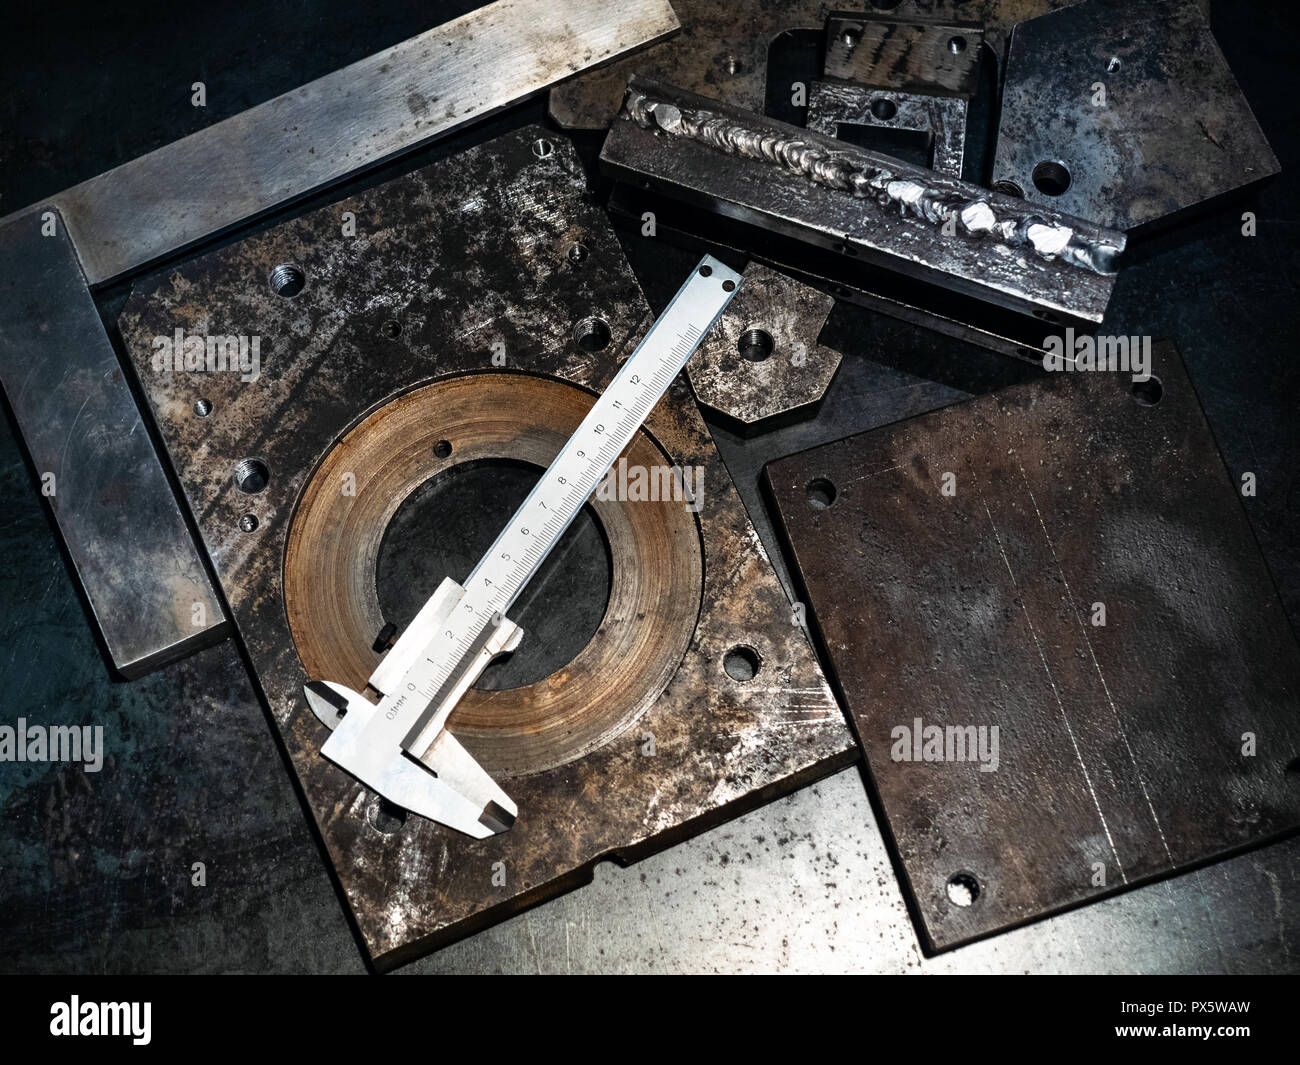 Metalworking still life - top view of calipers on metal workbench in turnery workshop in cold blue light Stock Photo